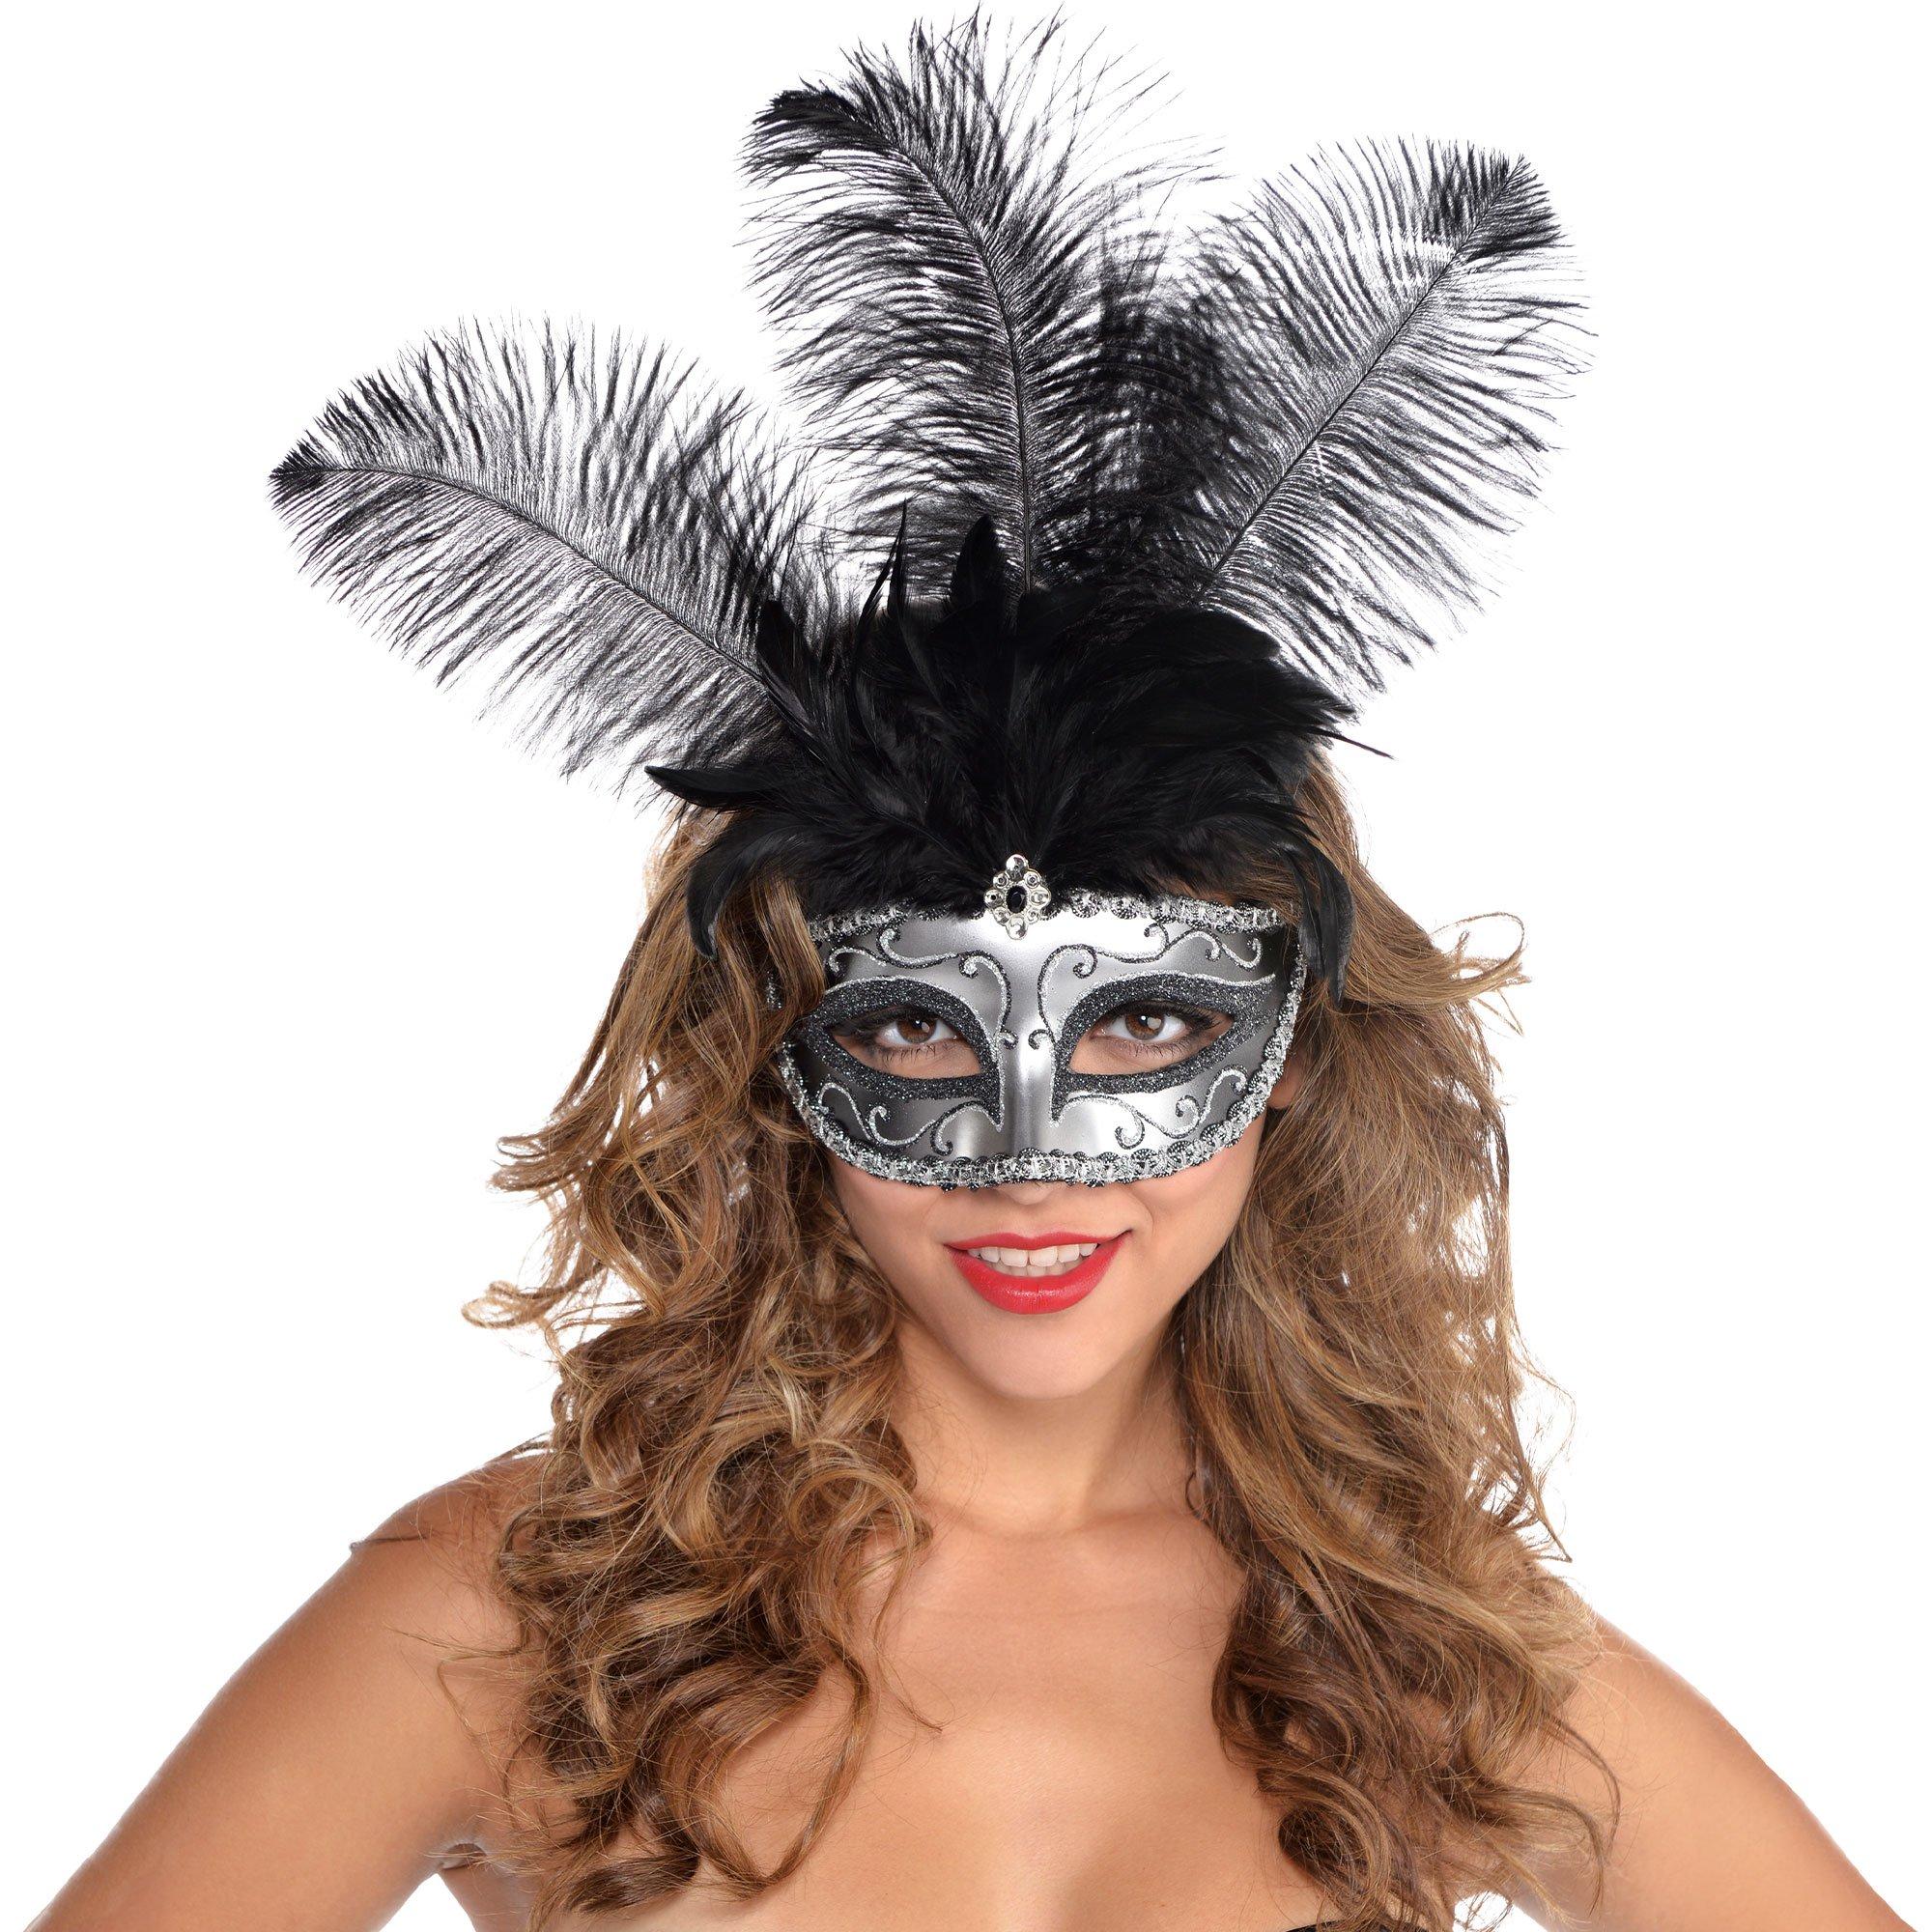 Silver W/ Rainbow Feathers Eye Mask Masquerade Madri gras prom party mask